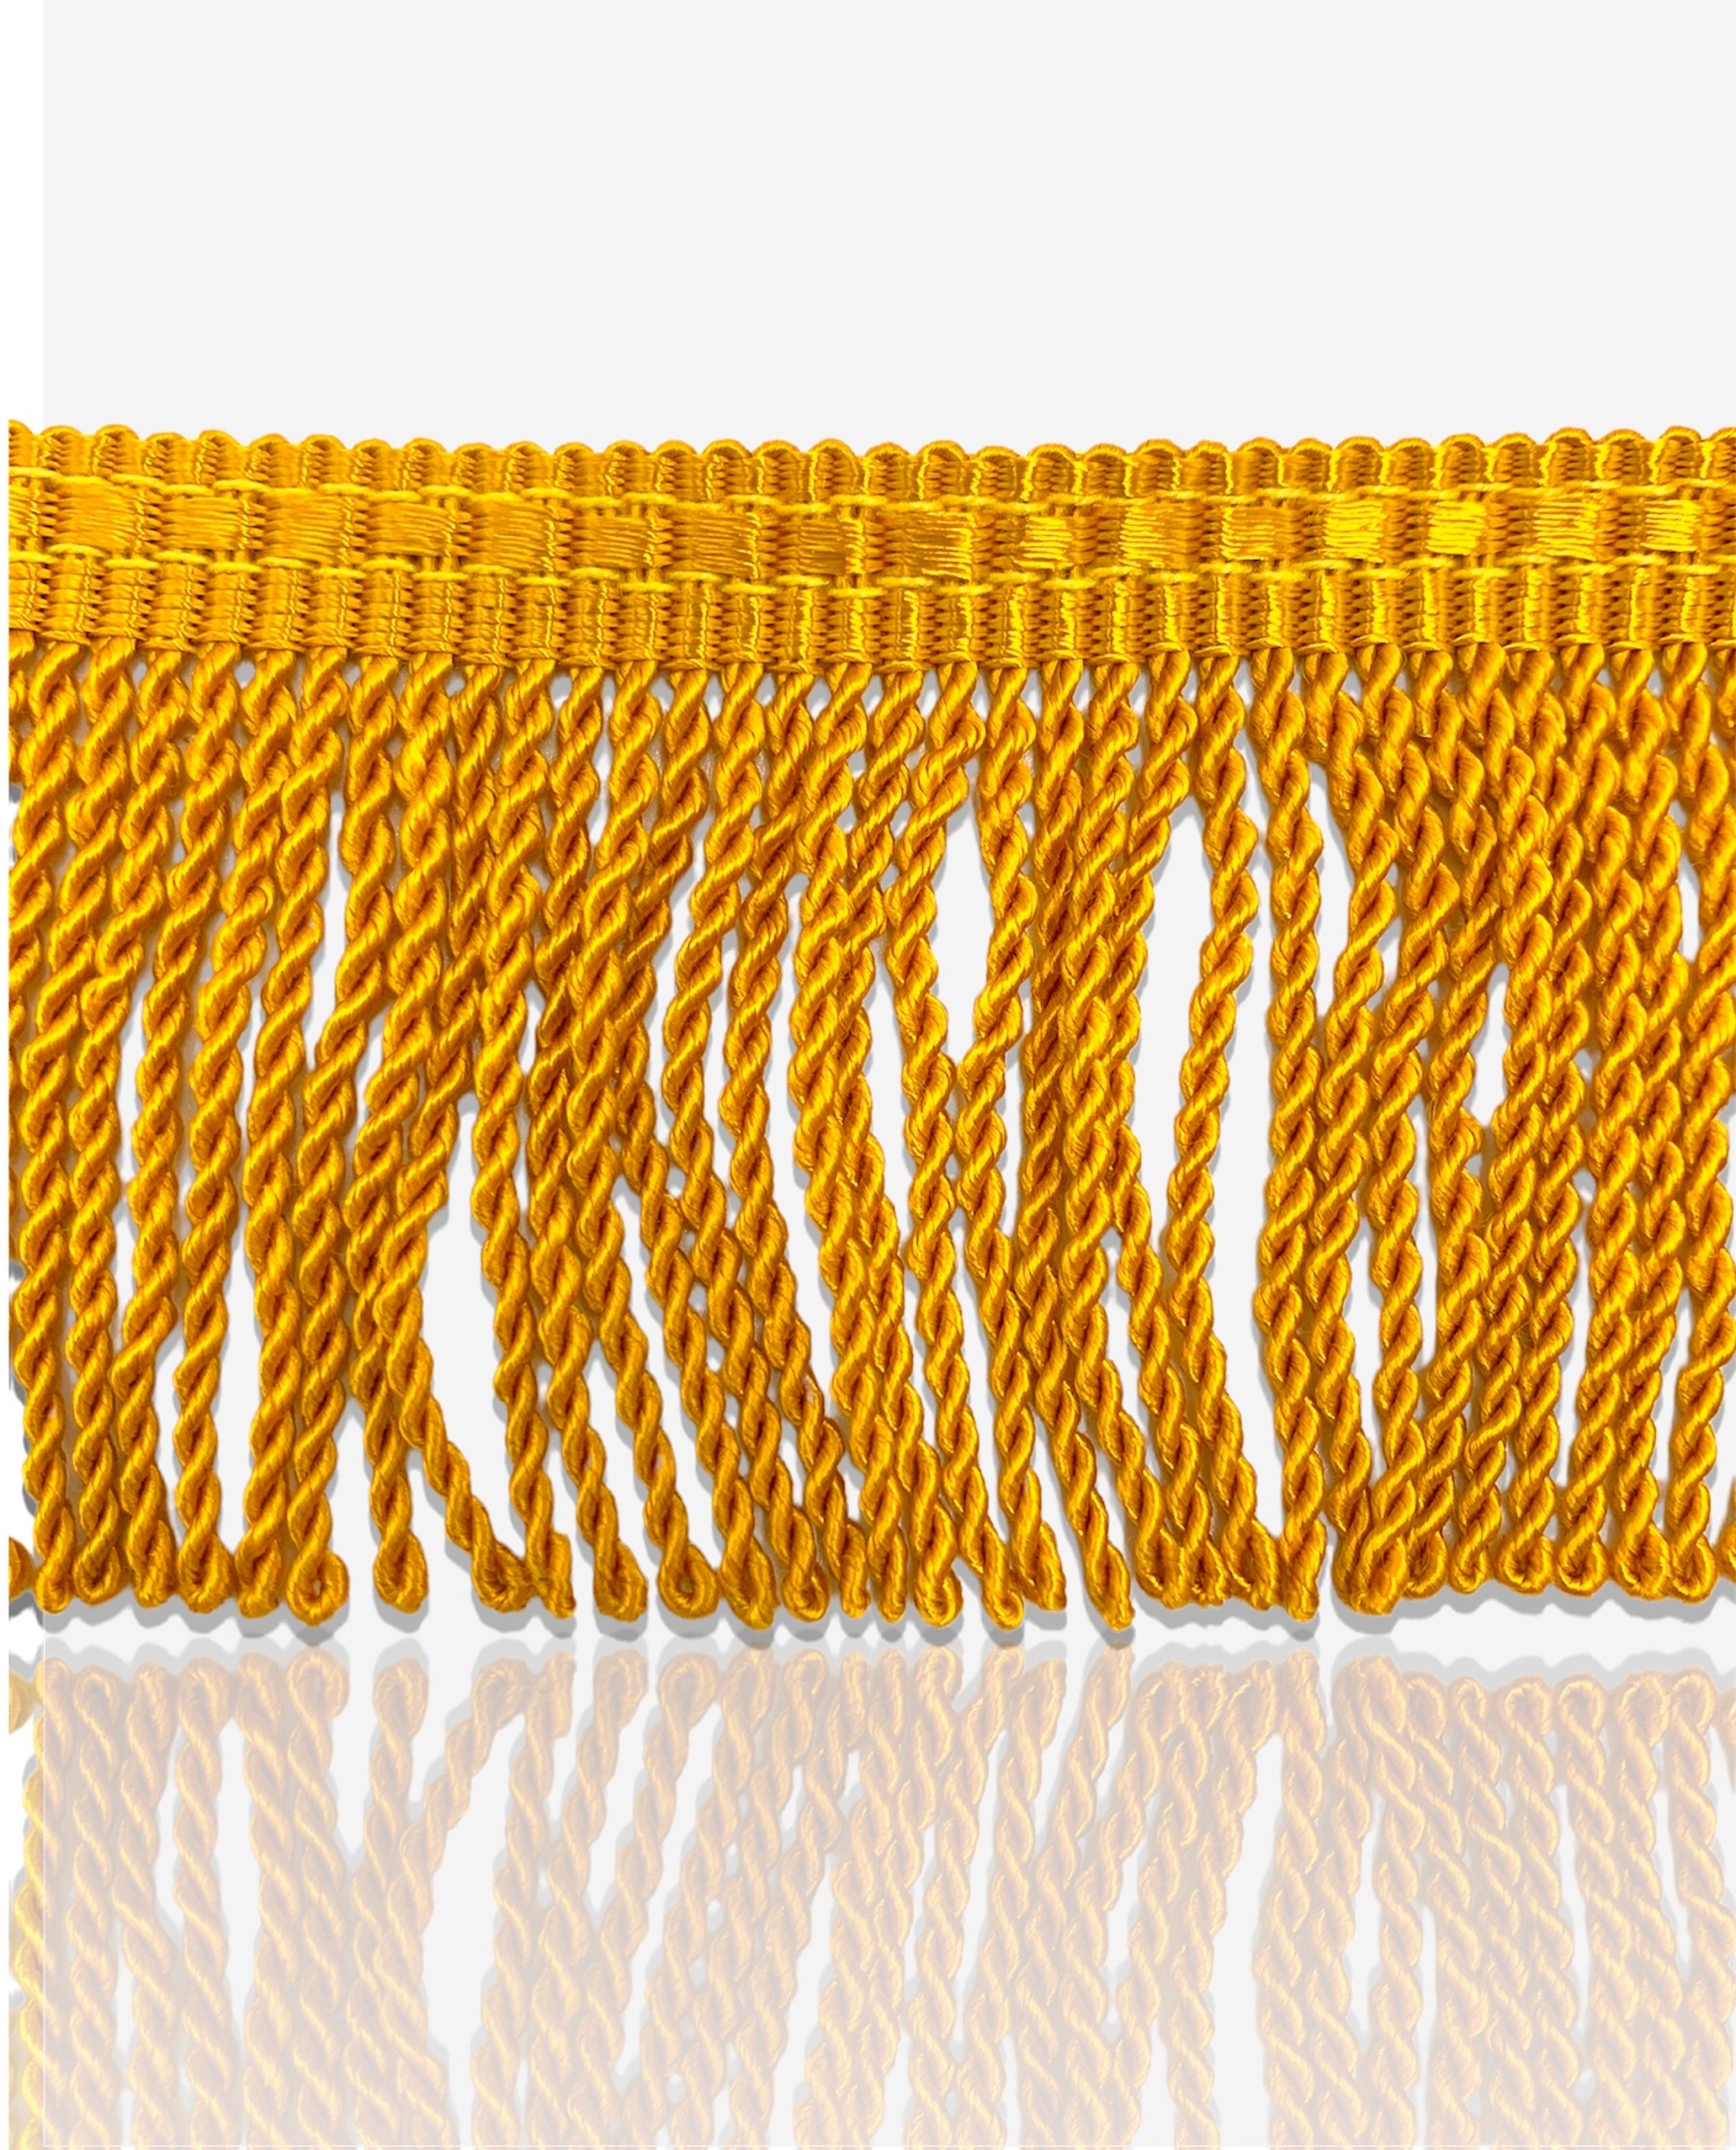 Nonmol Gold Fringe Trim Tassel Sewing Trim 6inch Width 10 Yards Long for Clothes Accessories Latin Wedding Dress DIY Lamp Shade Decoration (Gold),6